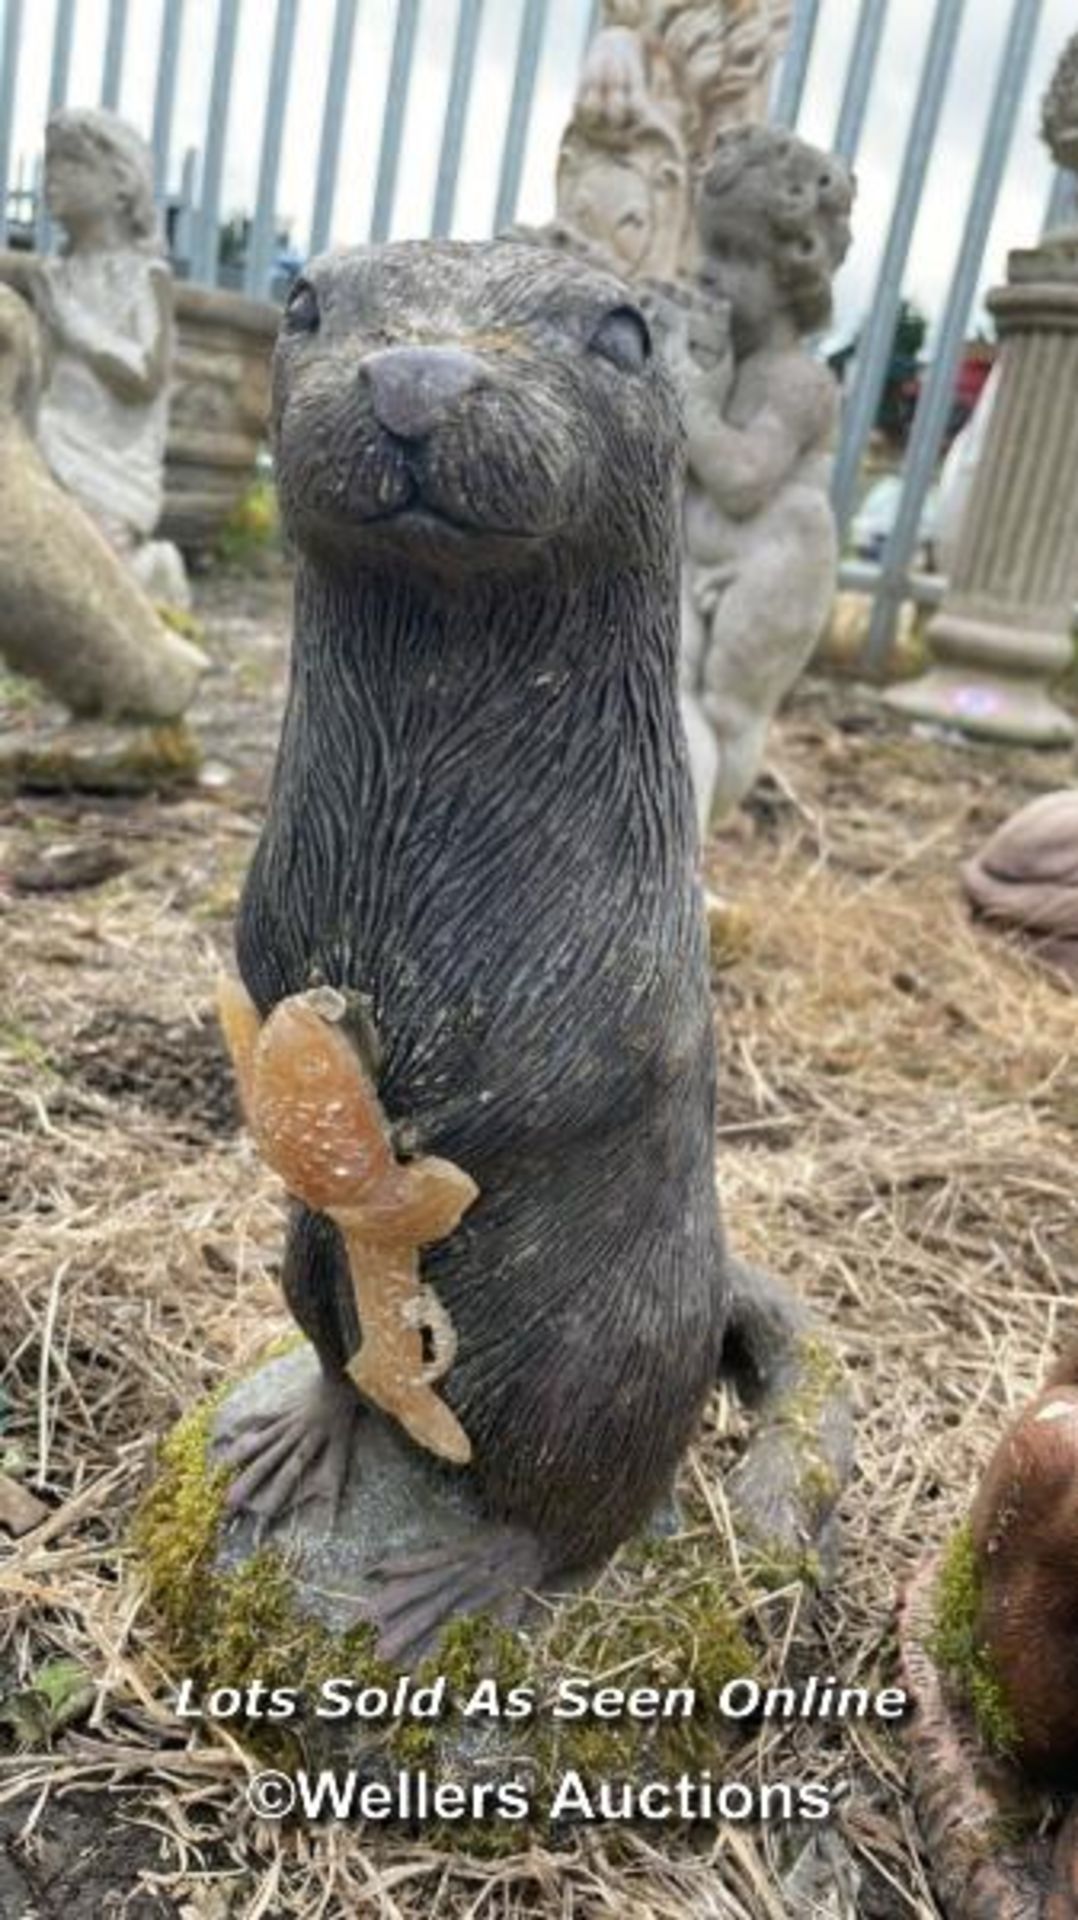 *OTTER AND A RABBIT, OTTER 36CM (H) / COLLECTION LOCATION: ALBOURNE (BN6), FULL ADDRESS AND - Image 3 of 3